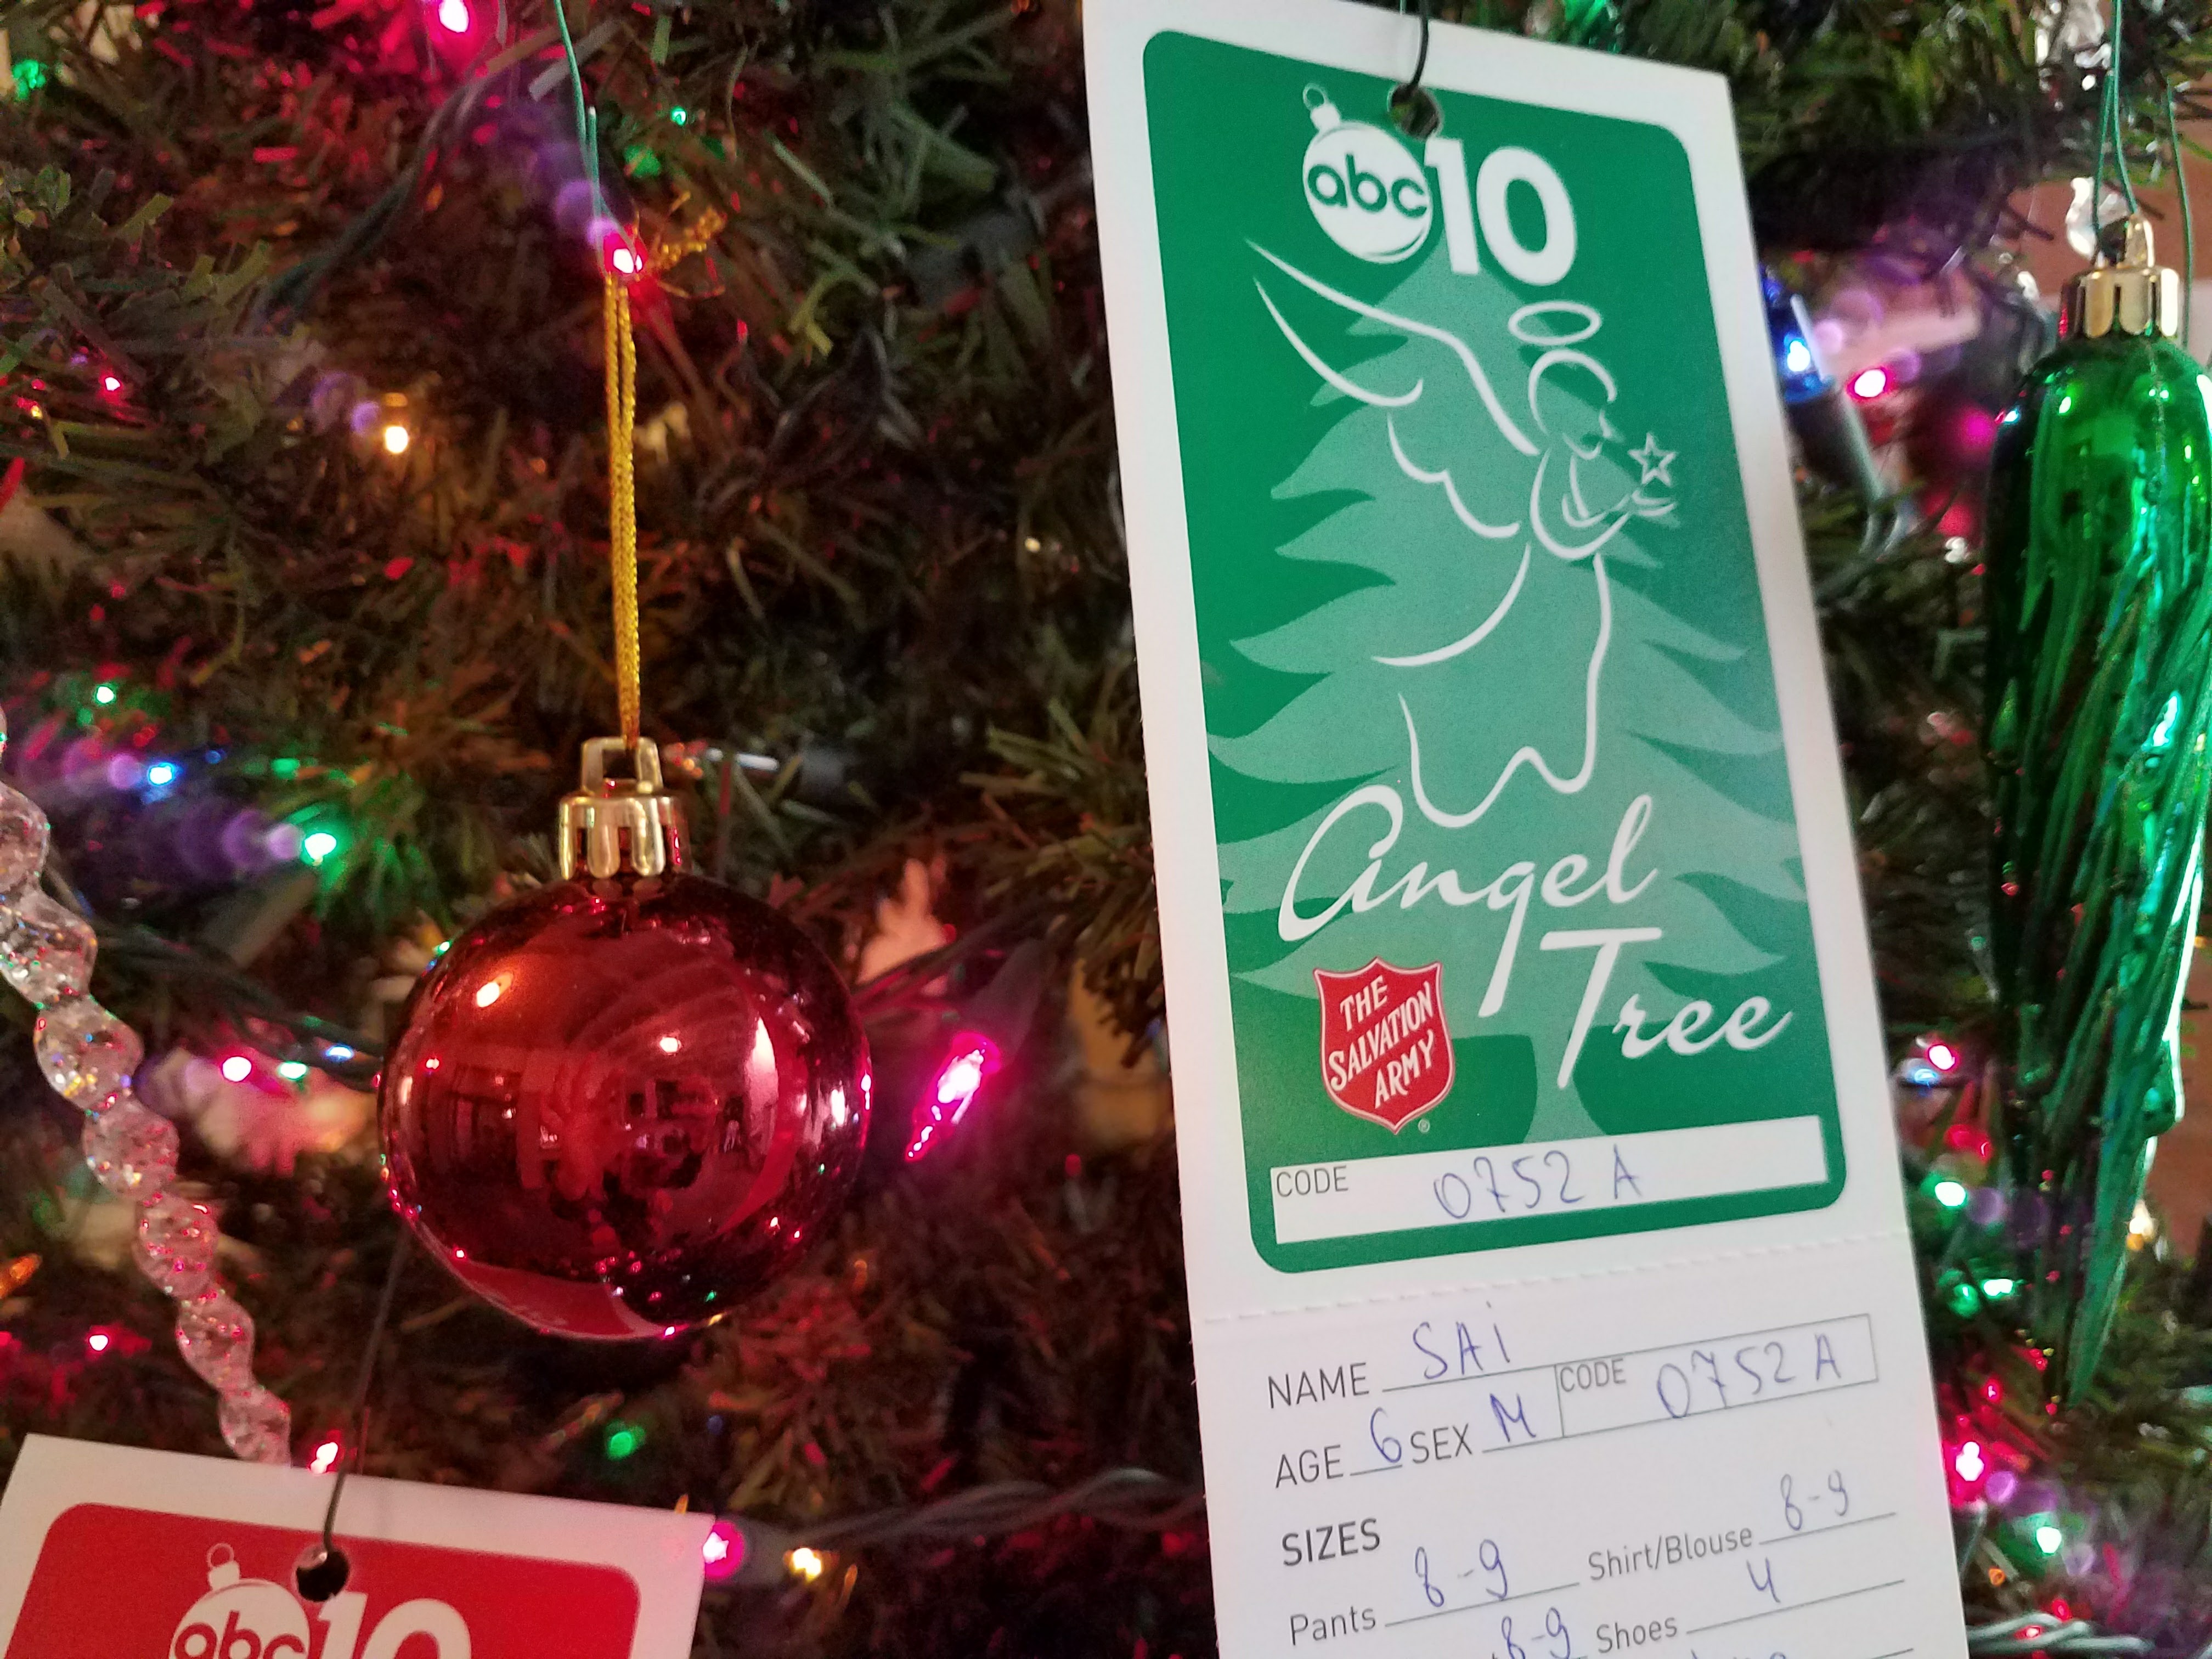 Pick An Angel Tree Tag To Fulfill A Child S Wish November 10th Sierra 2